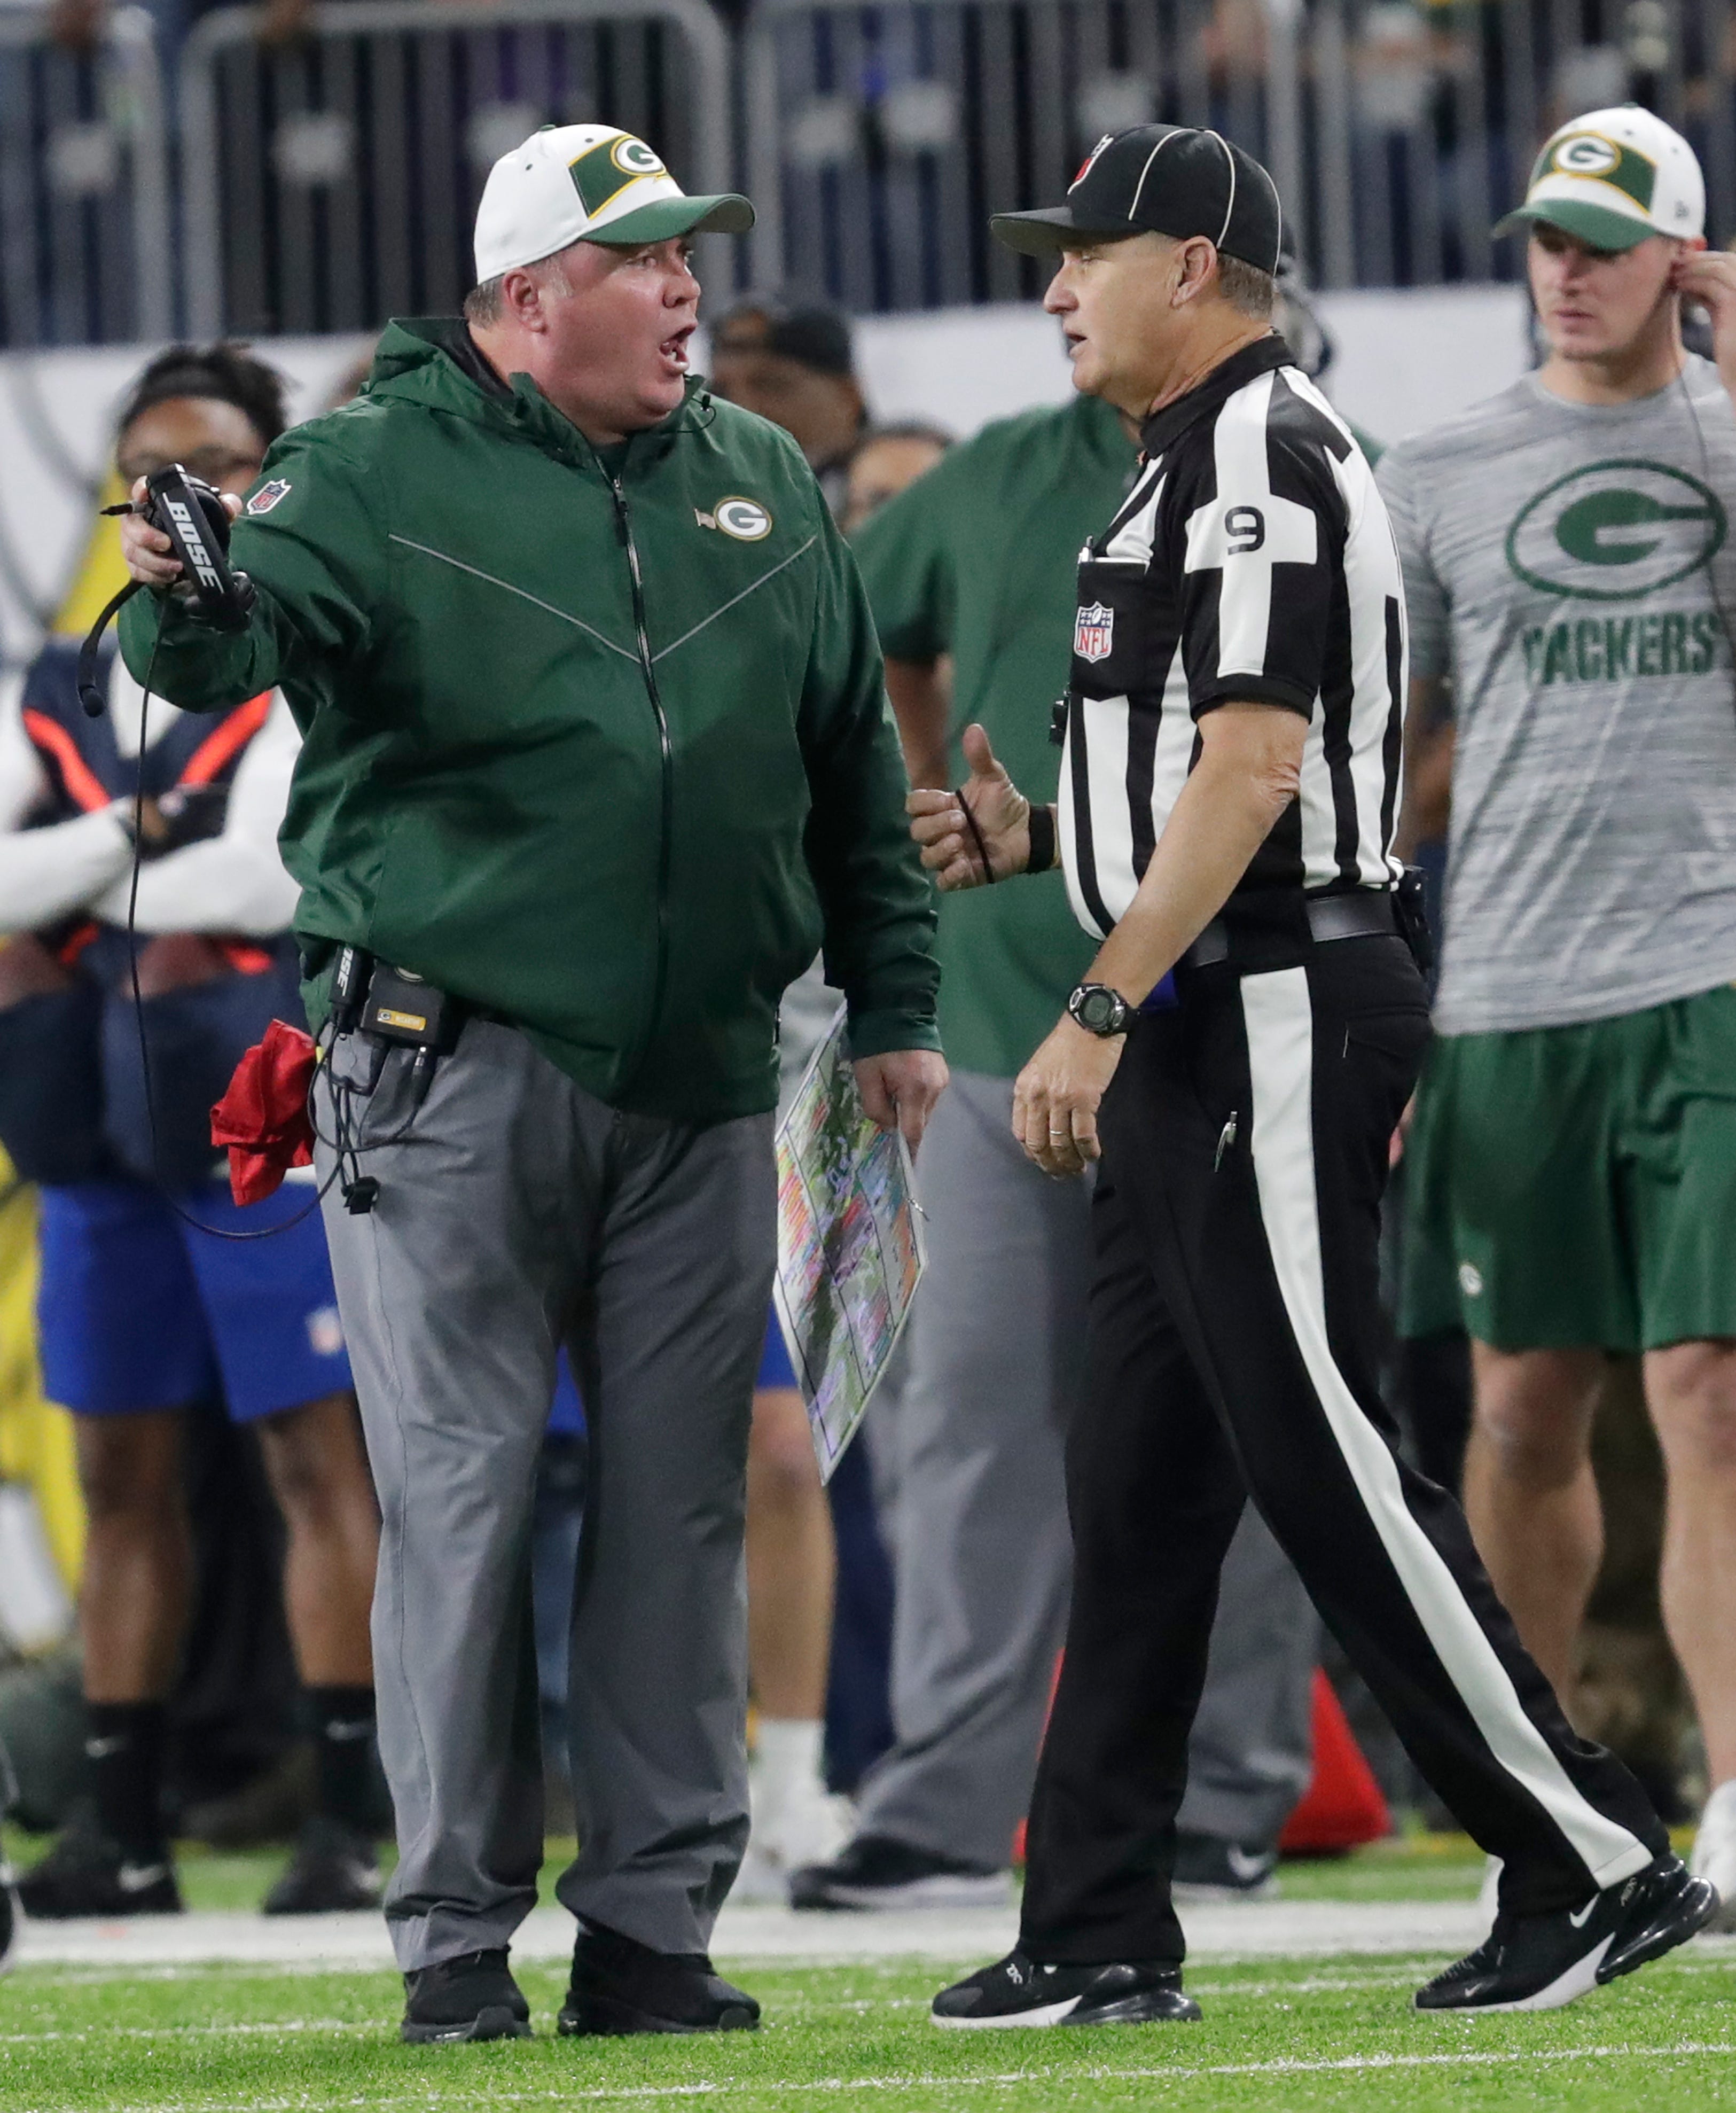 Green Bay Packers head coach Mike McCarthy yells at an official in the third quarter against the Minnesota Vikings during their football game Sunday, November 25, 2018, at U.S. Bank Stadium in Minneapolis, Minn. 
Dan Powers/USA TODAY NETWORK-Wisconsin